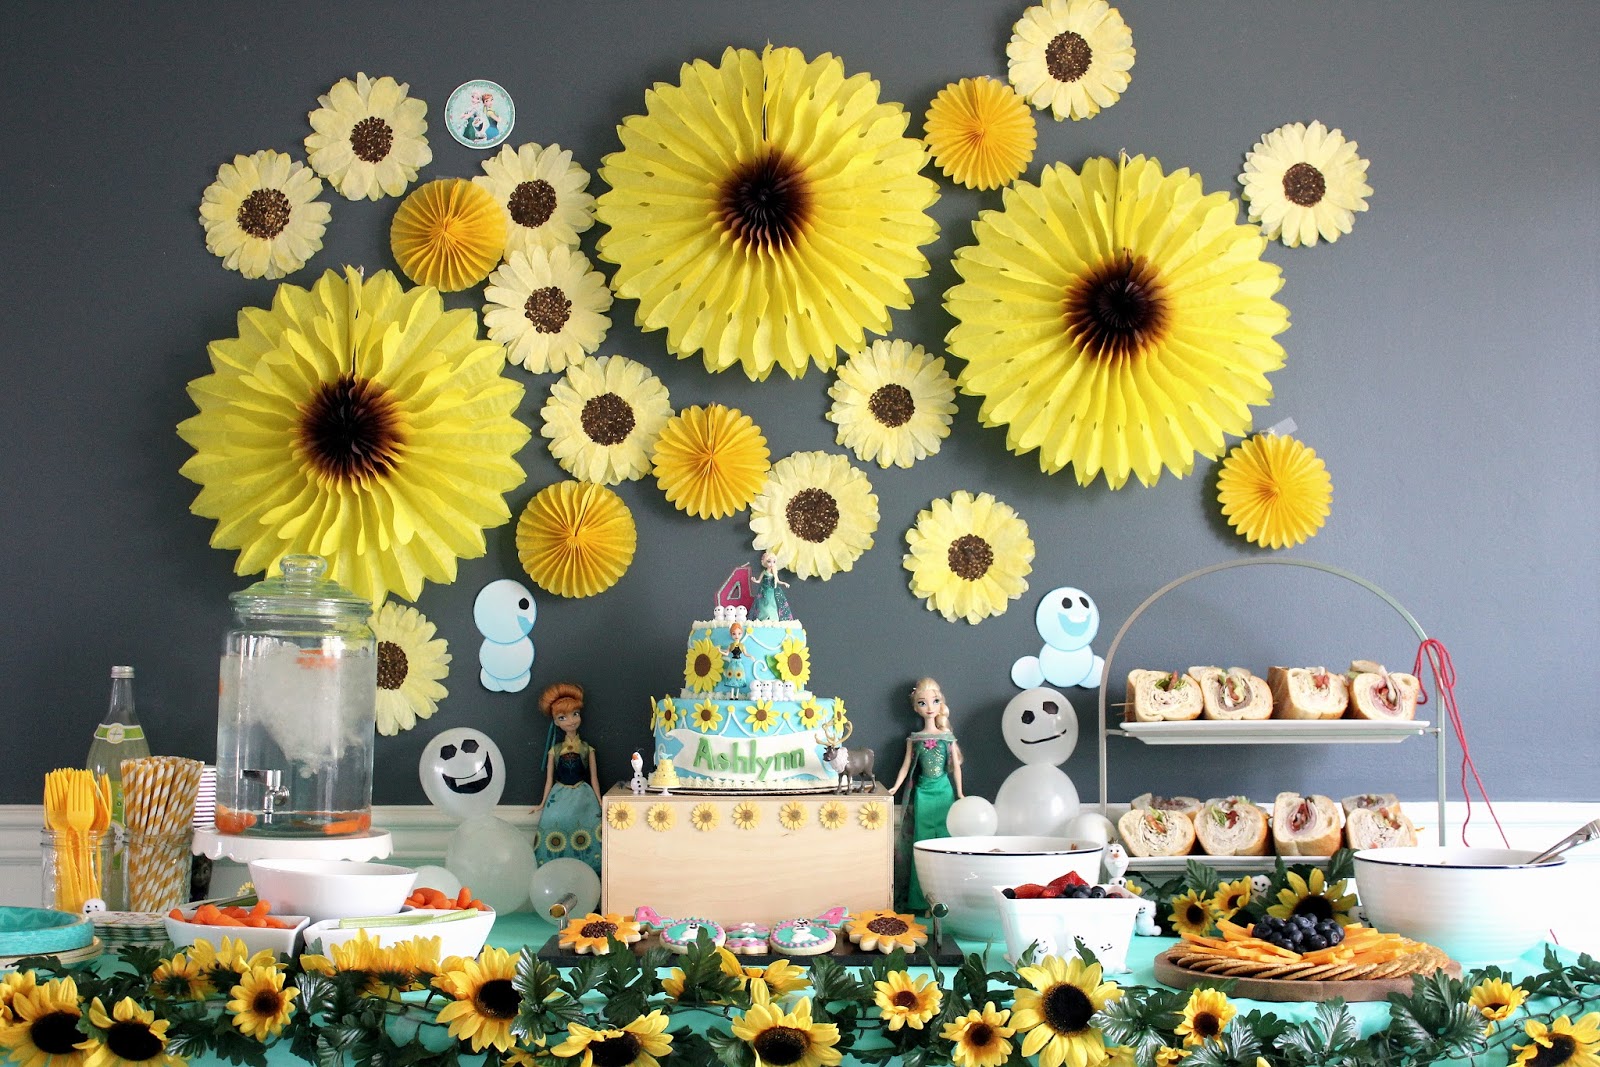  Sunflower  Themed Party  Decorations  Decoration For Home